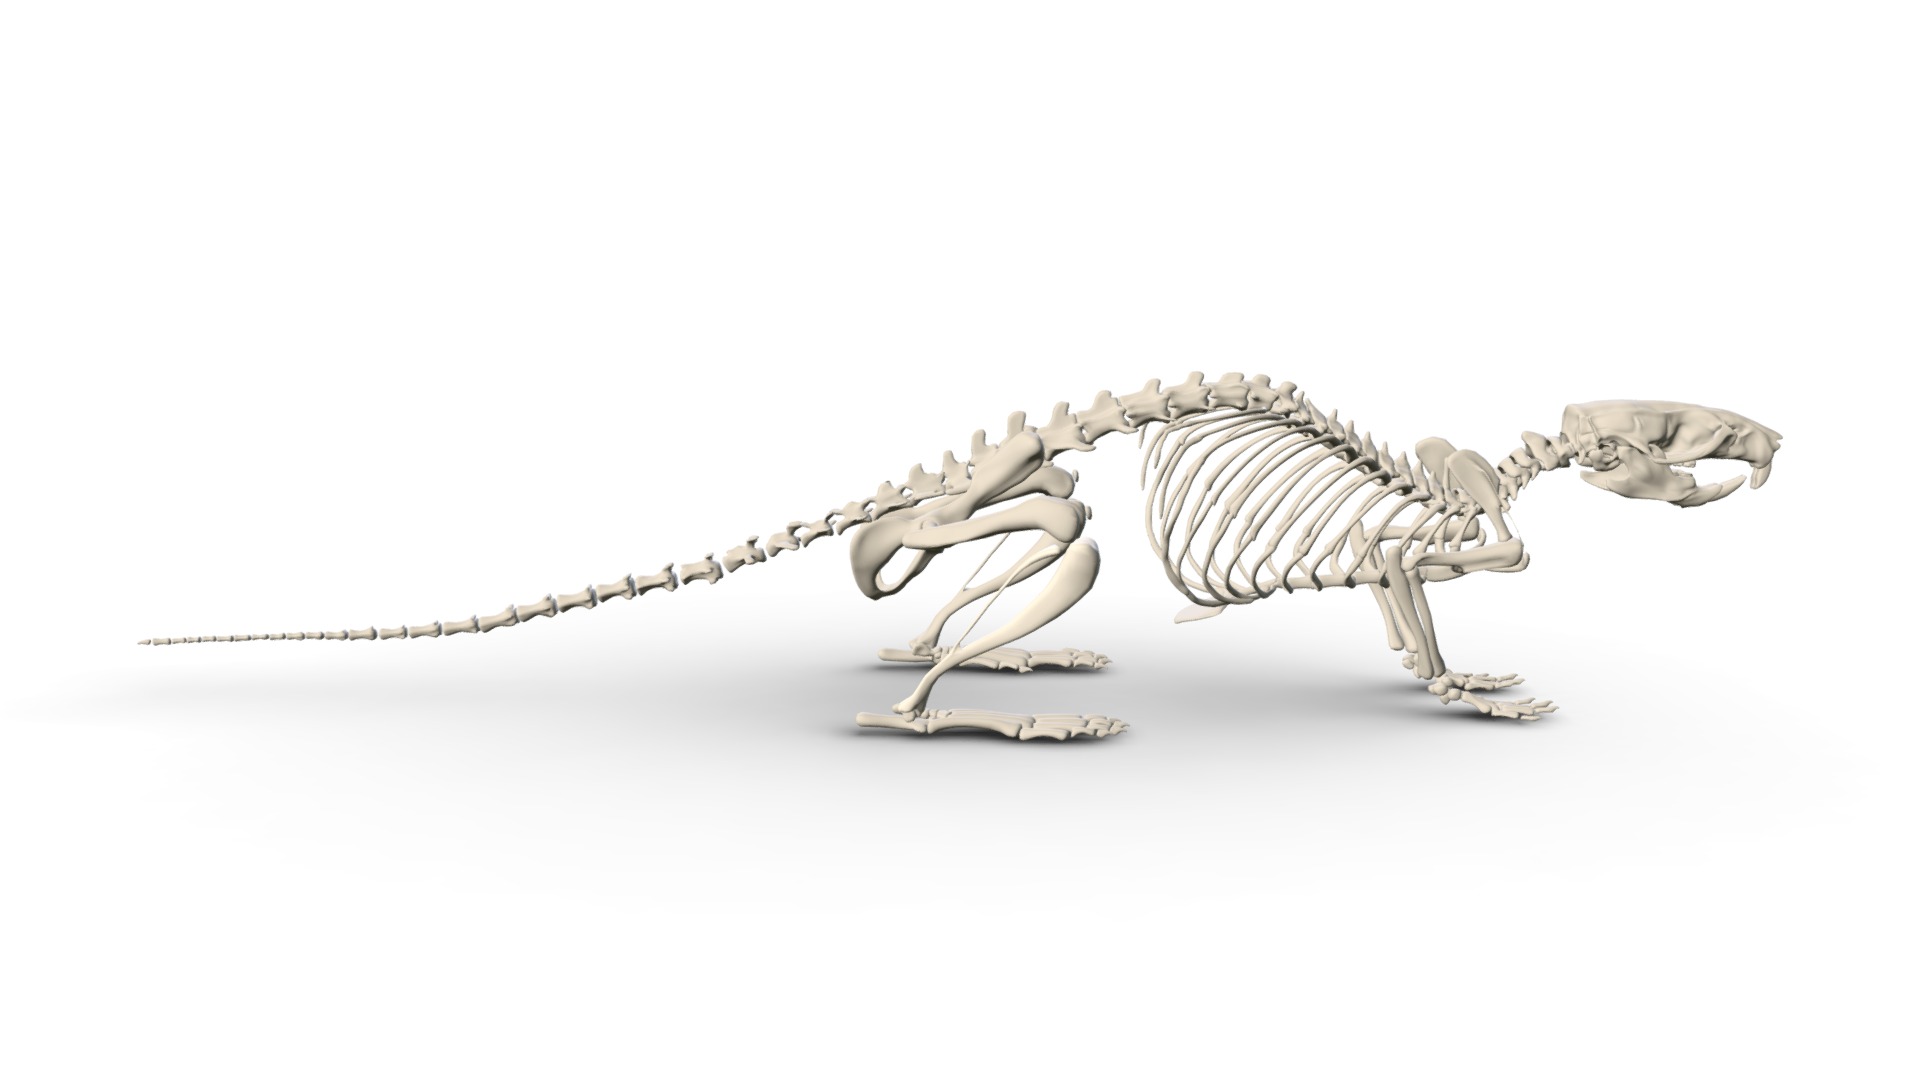 The basic elements of a skeleton can be seen in a rat skeleton 3d model